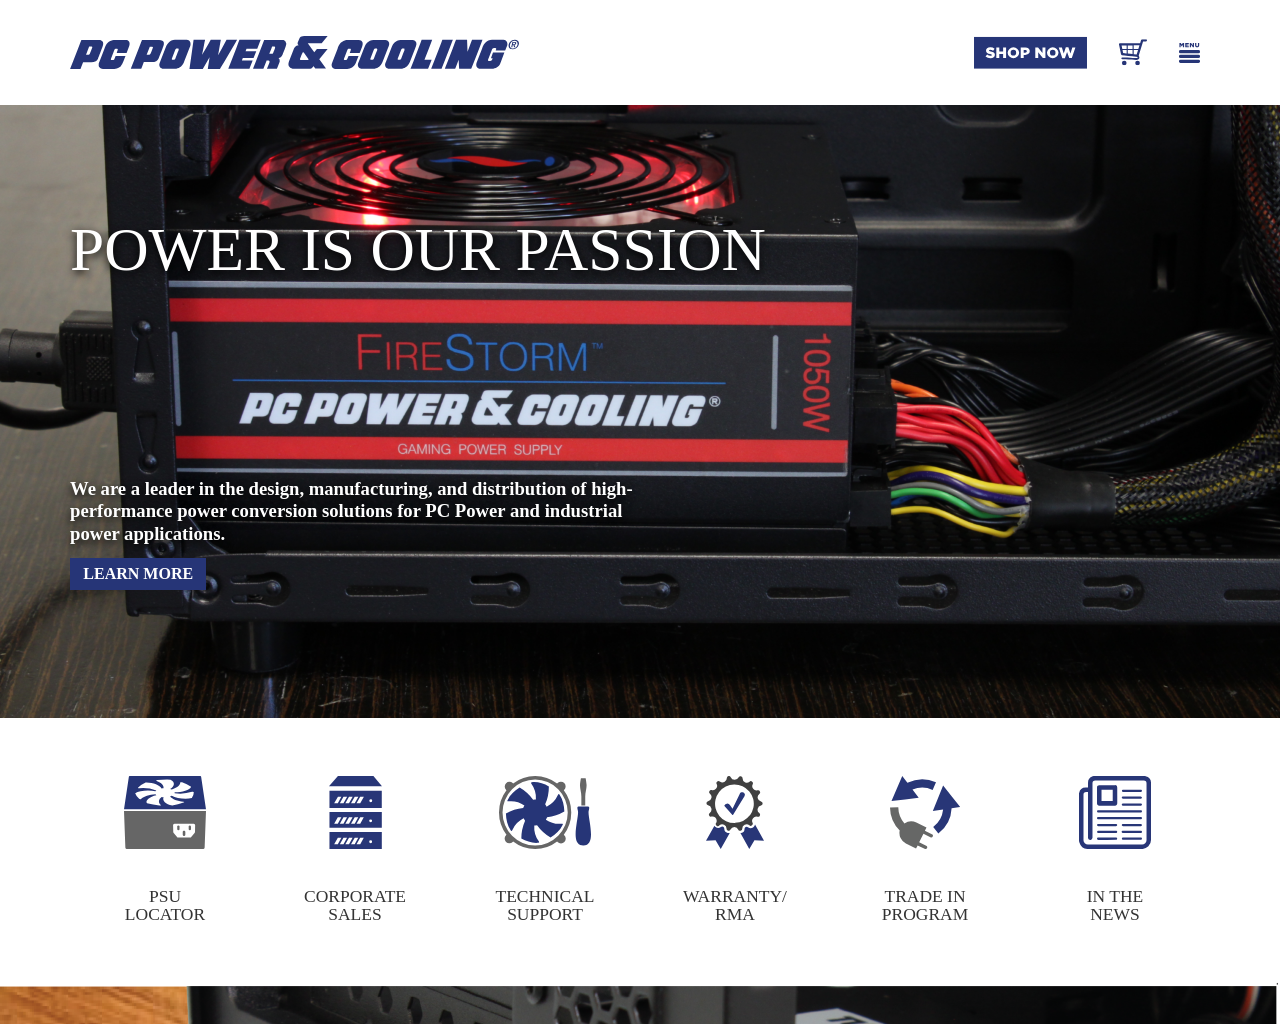 pcpowercooling.com